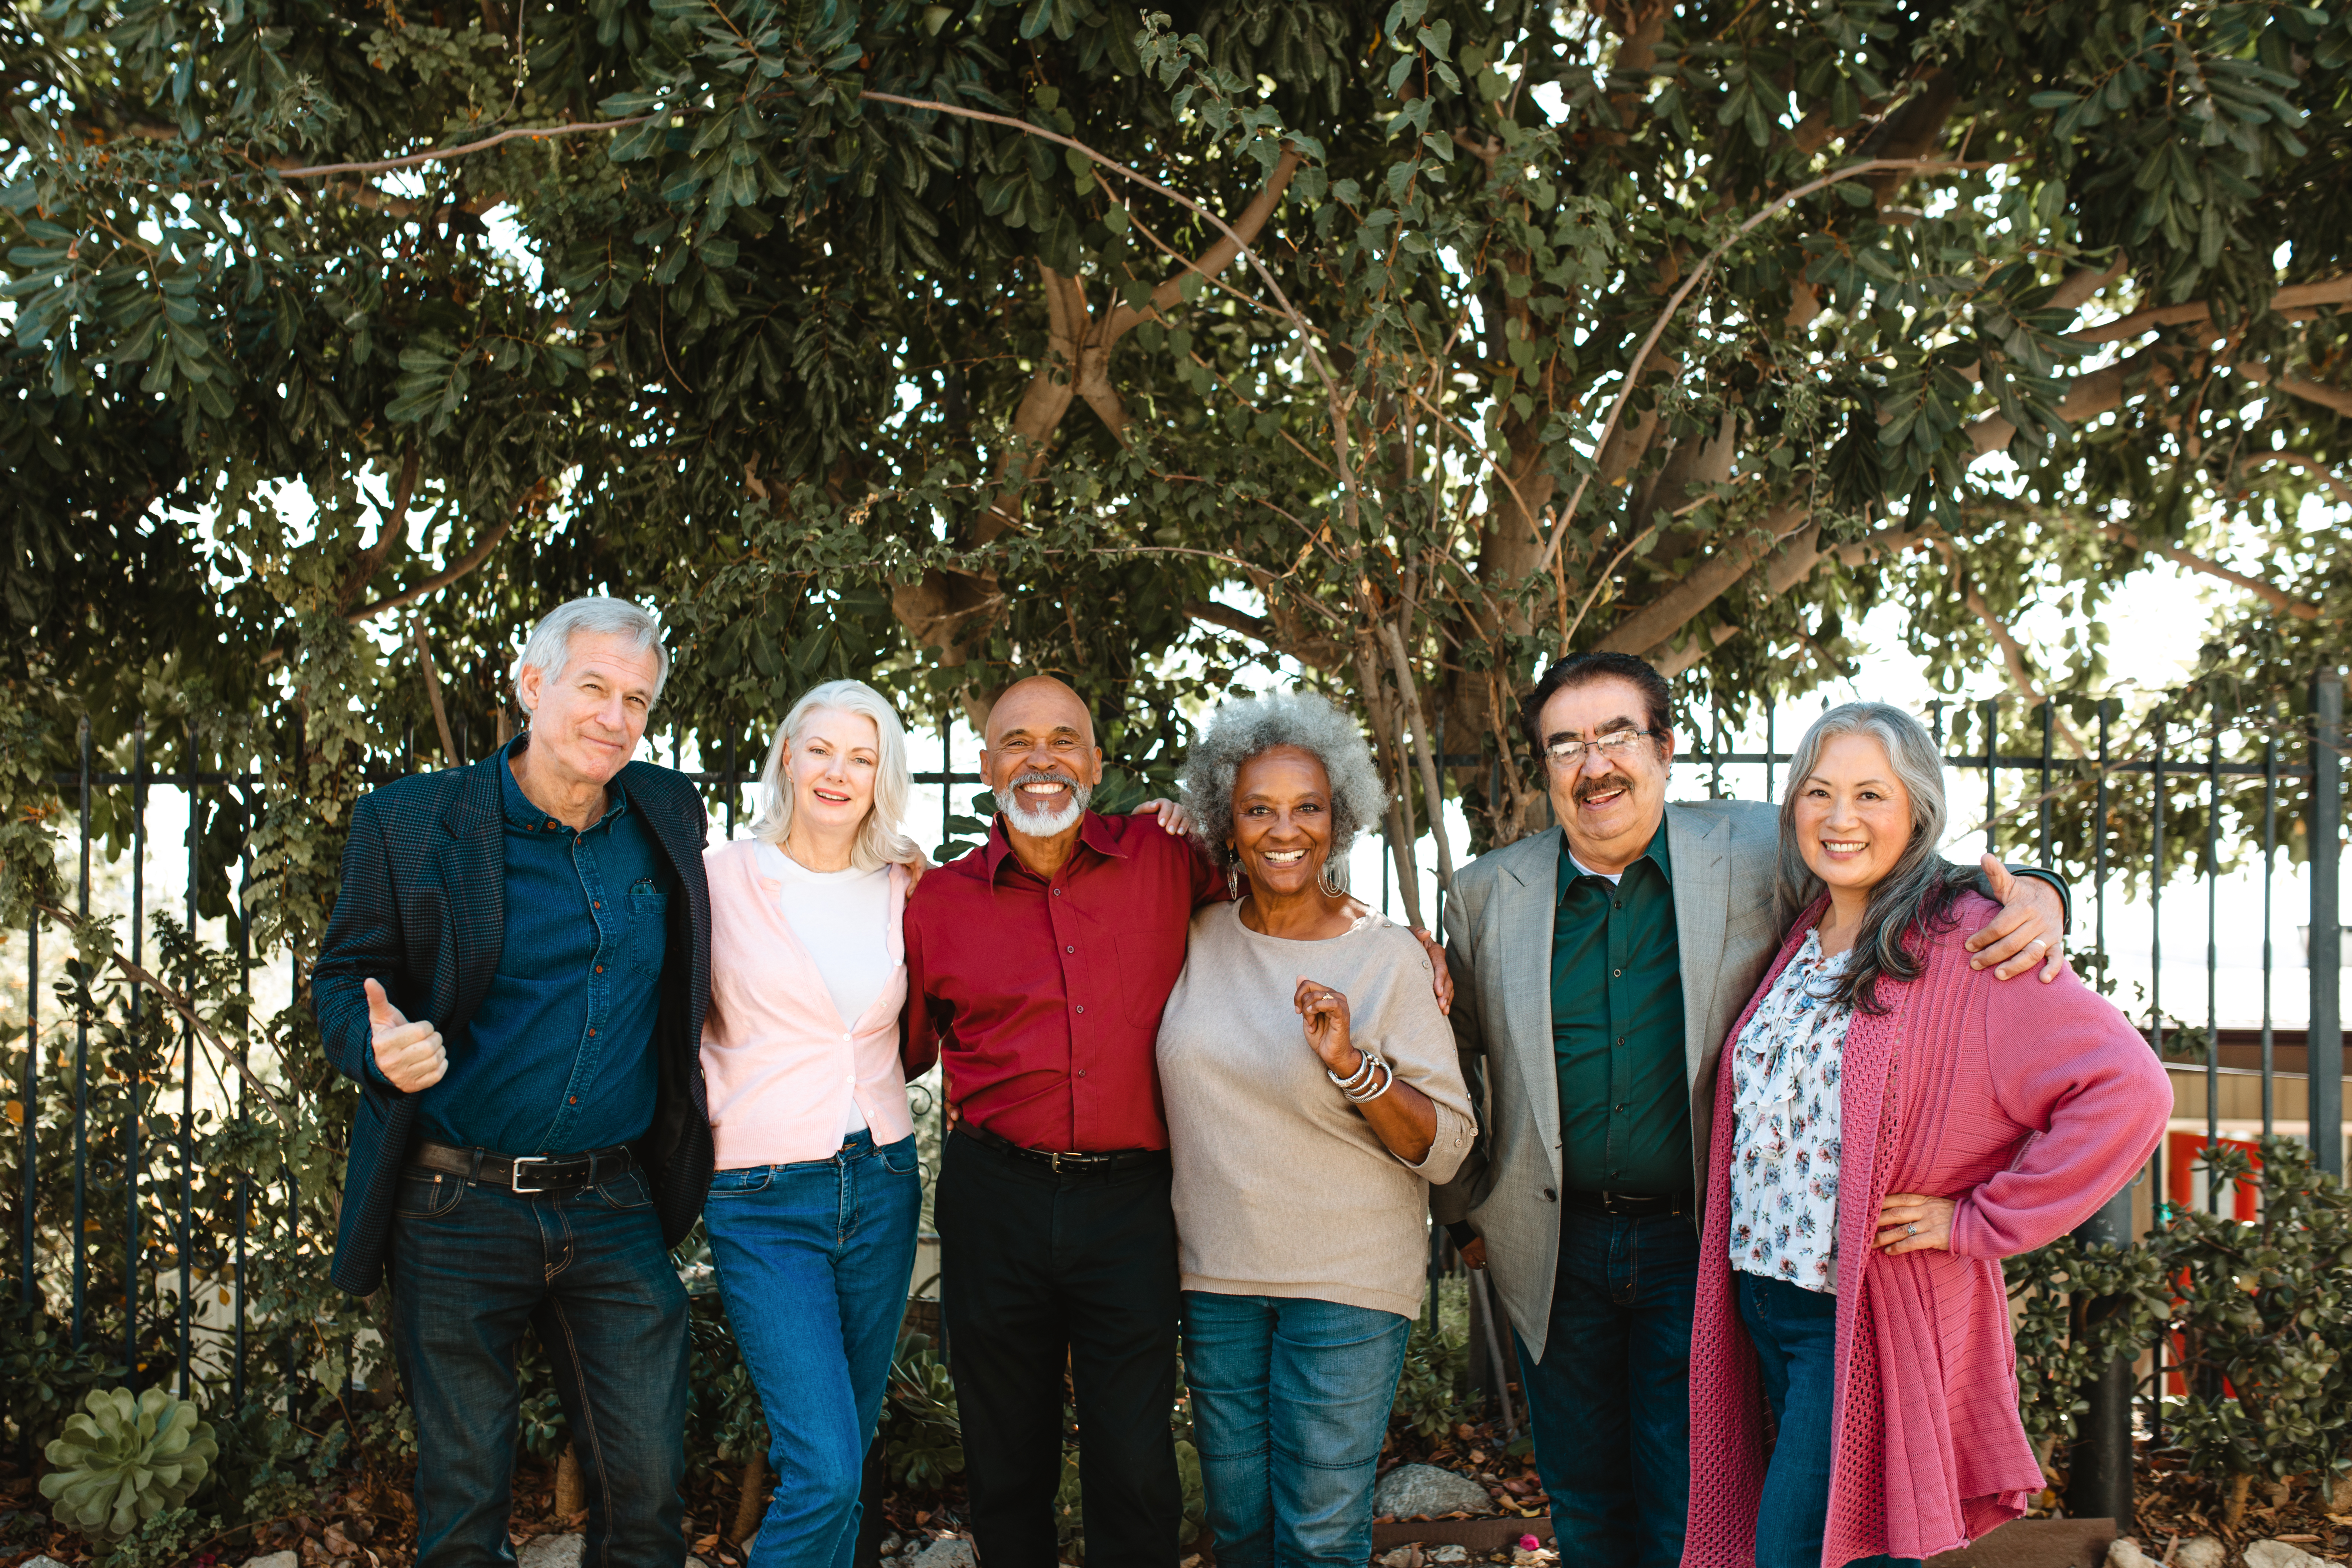 Group of older adults smiling outdoors